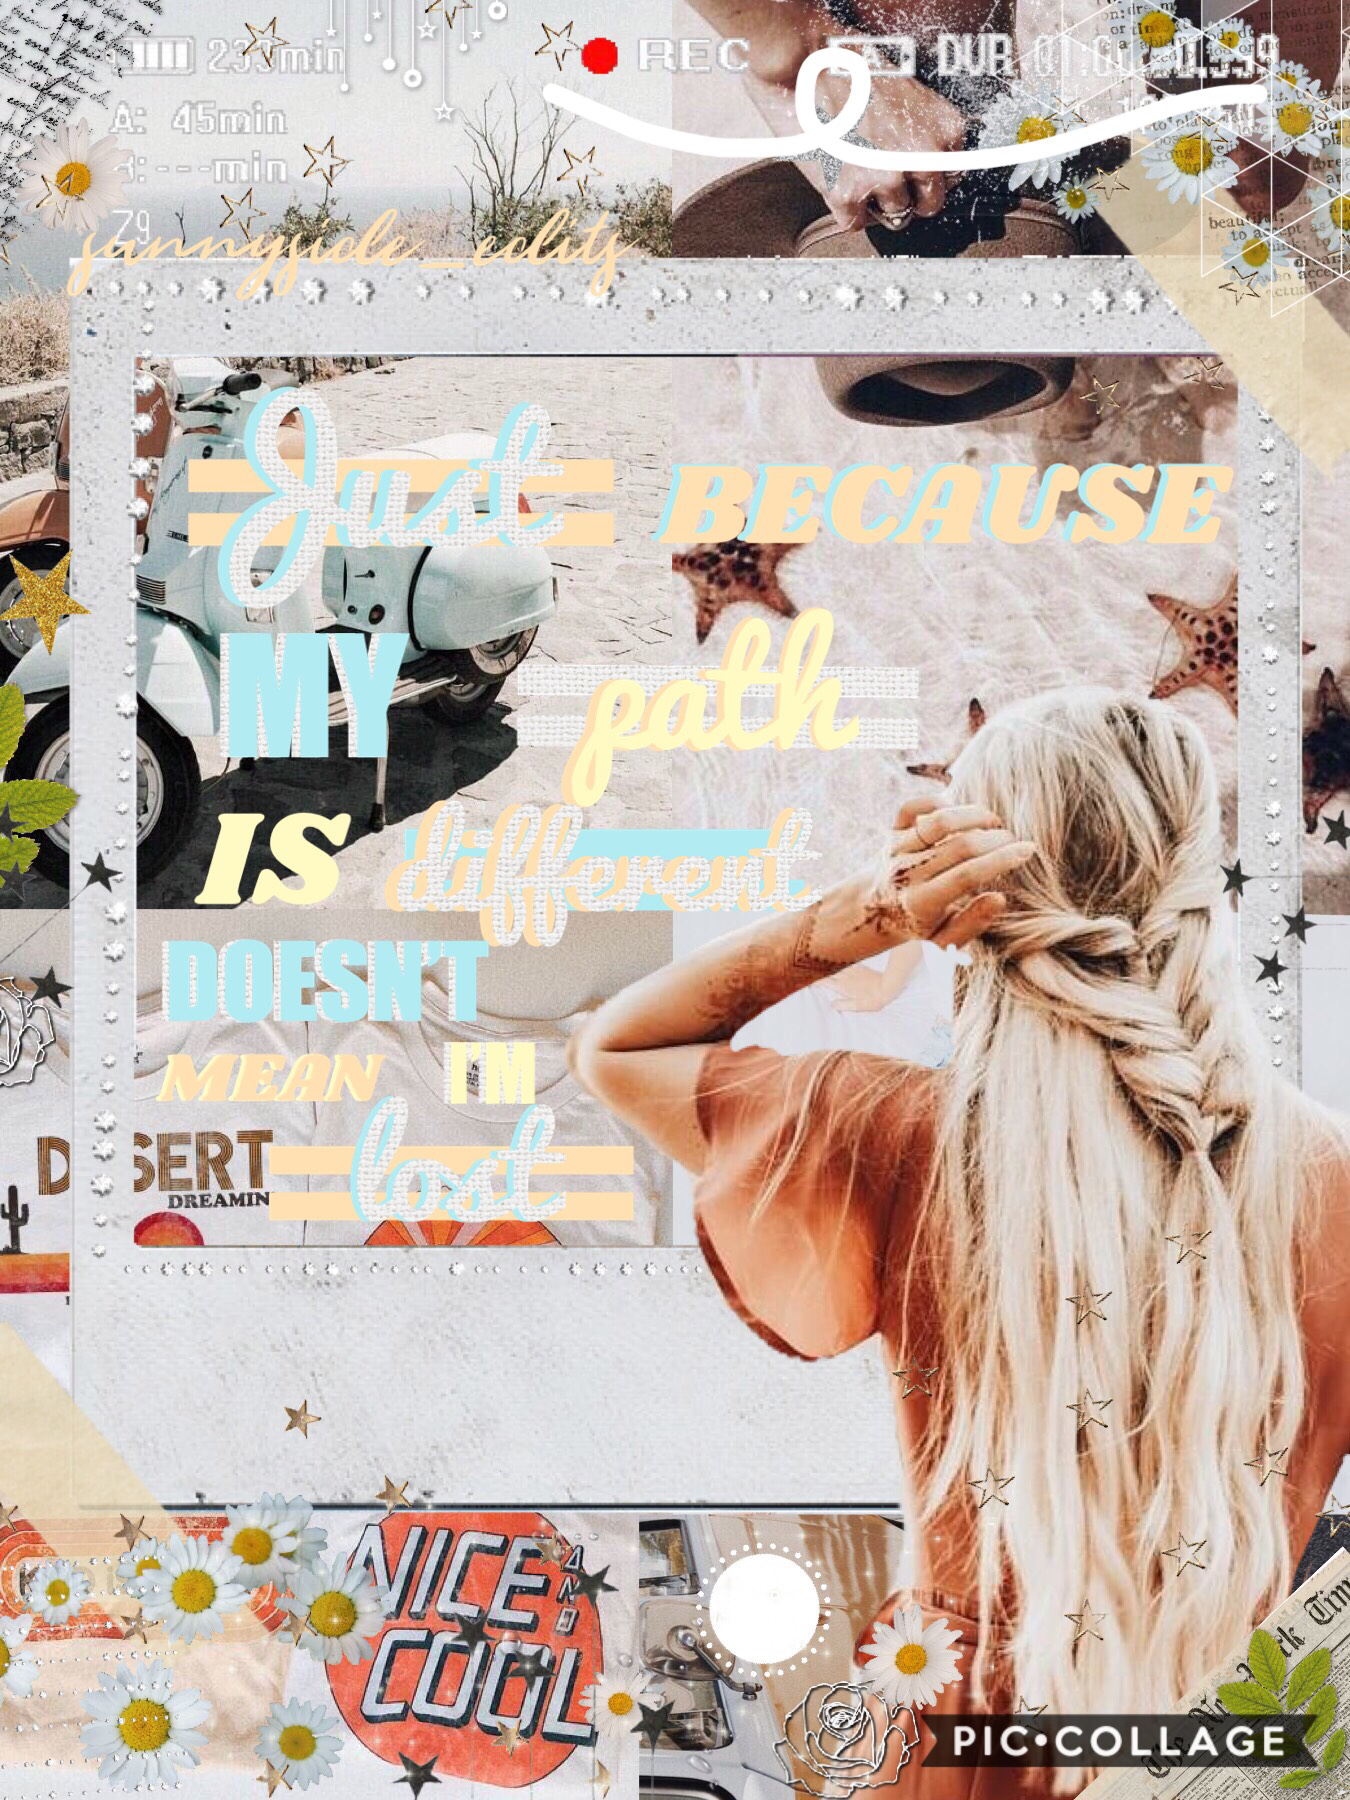 Hey! ✨ (tap)

Inspired by @meandmeonly 💞
I trying to switch out my layouts 🌸
Hopefully you all like it! 😁